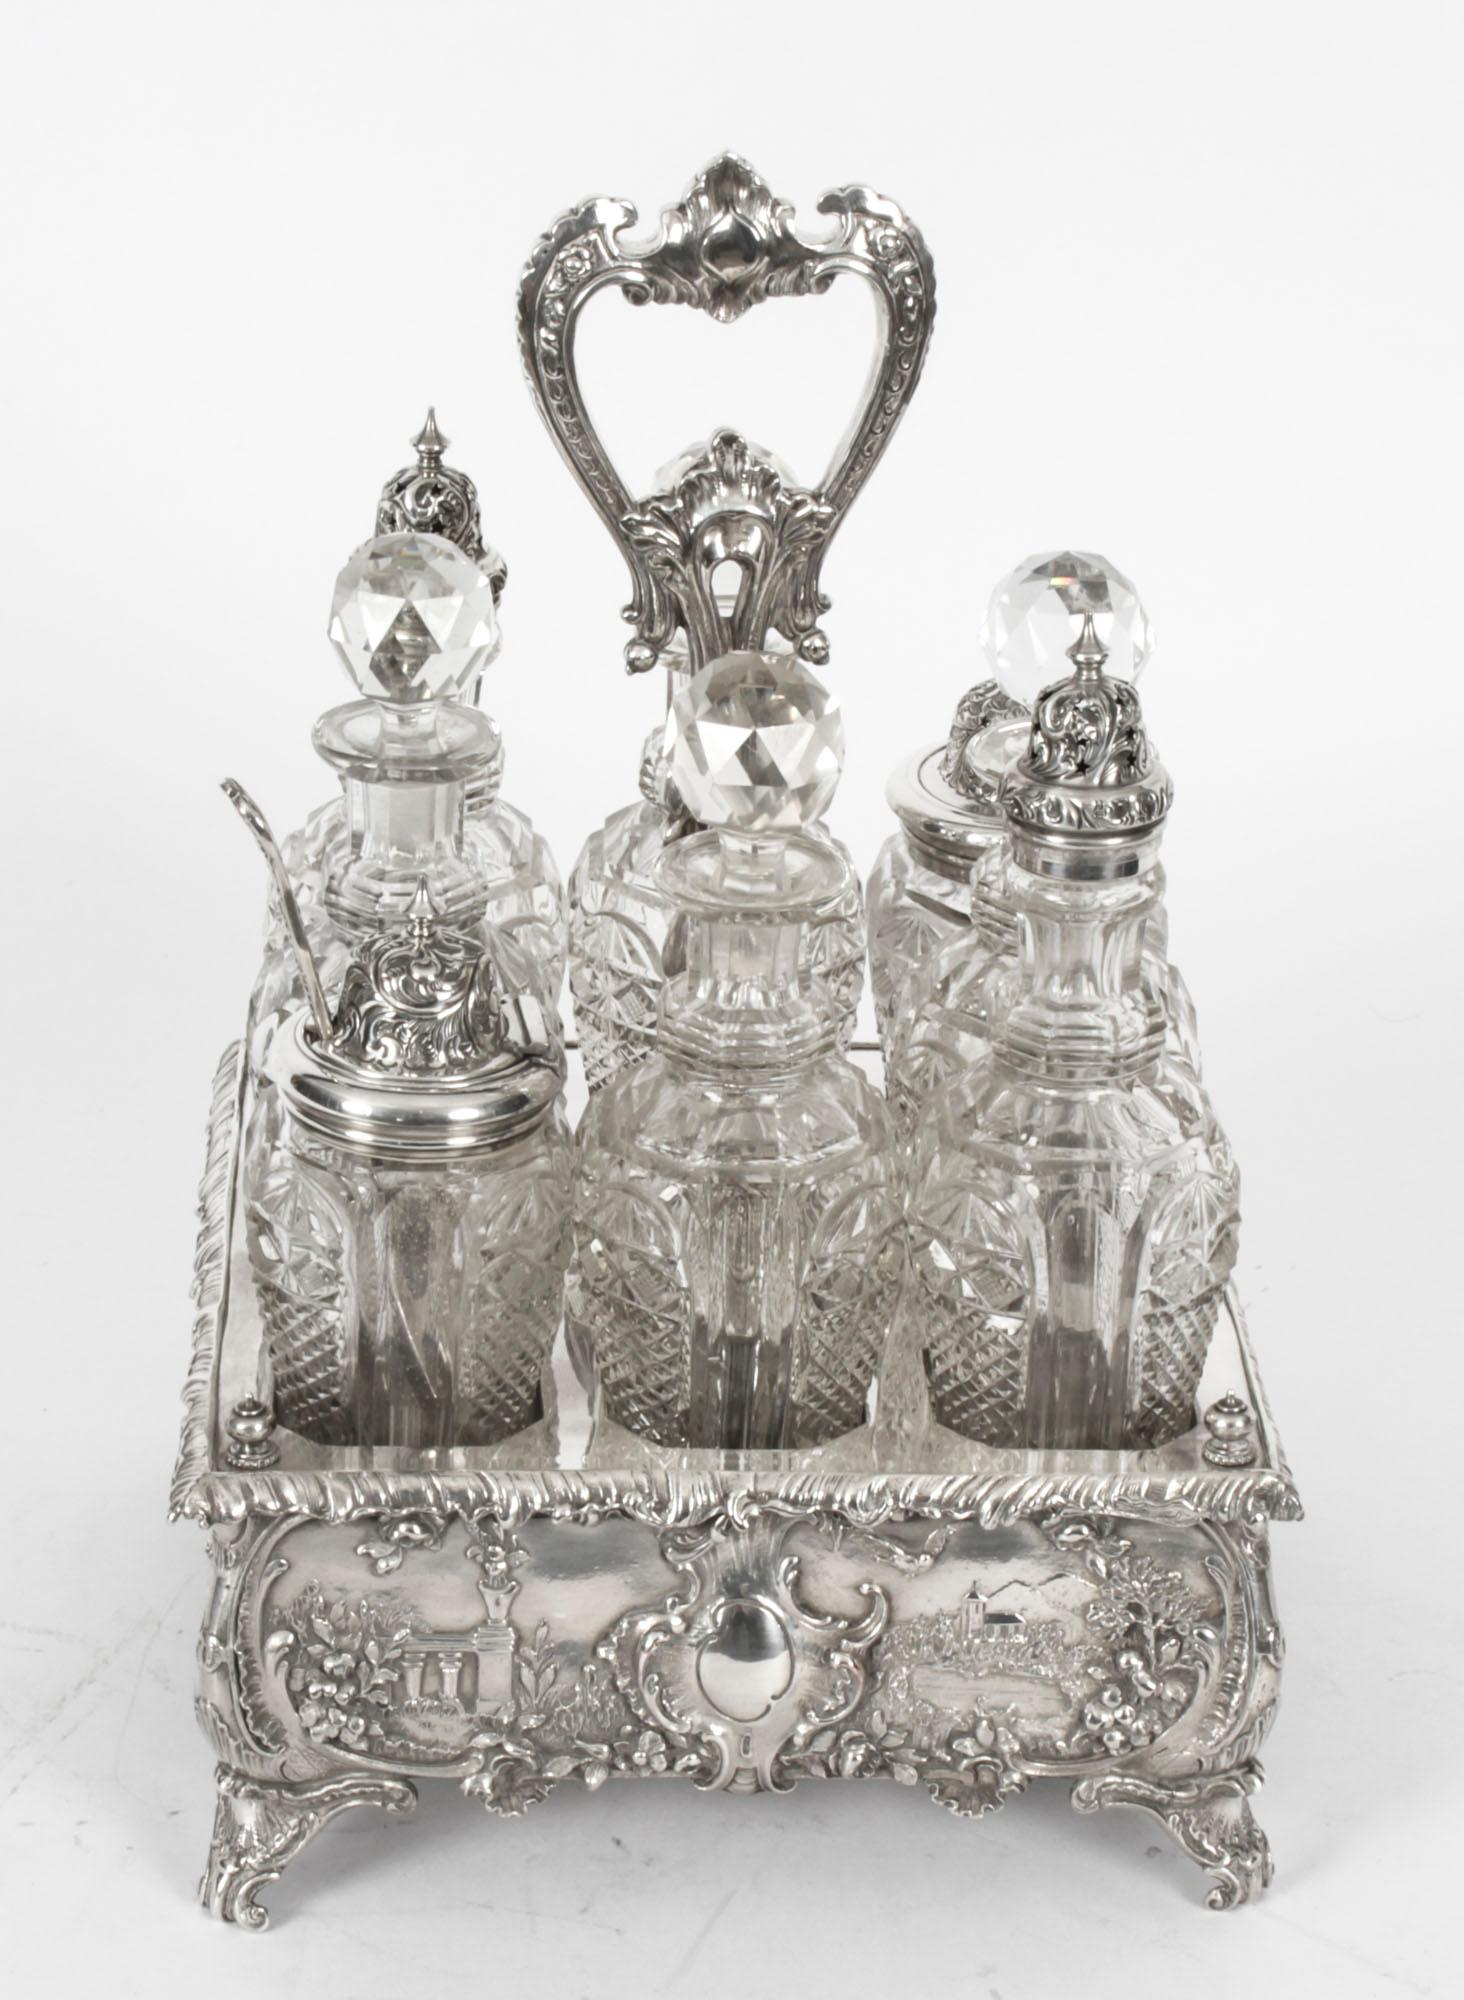 This is a gorgeous antique silver plated cruet set bearing the makers mark of the renowned silversmith family, Walkers and Hall, and circa 1845 in date.
 
The set comprises a beautifully decorative silver plated cruet Stand holding eight exquisite